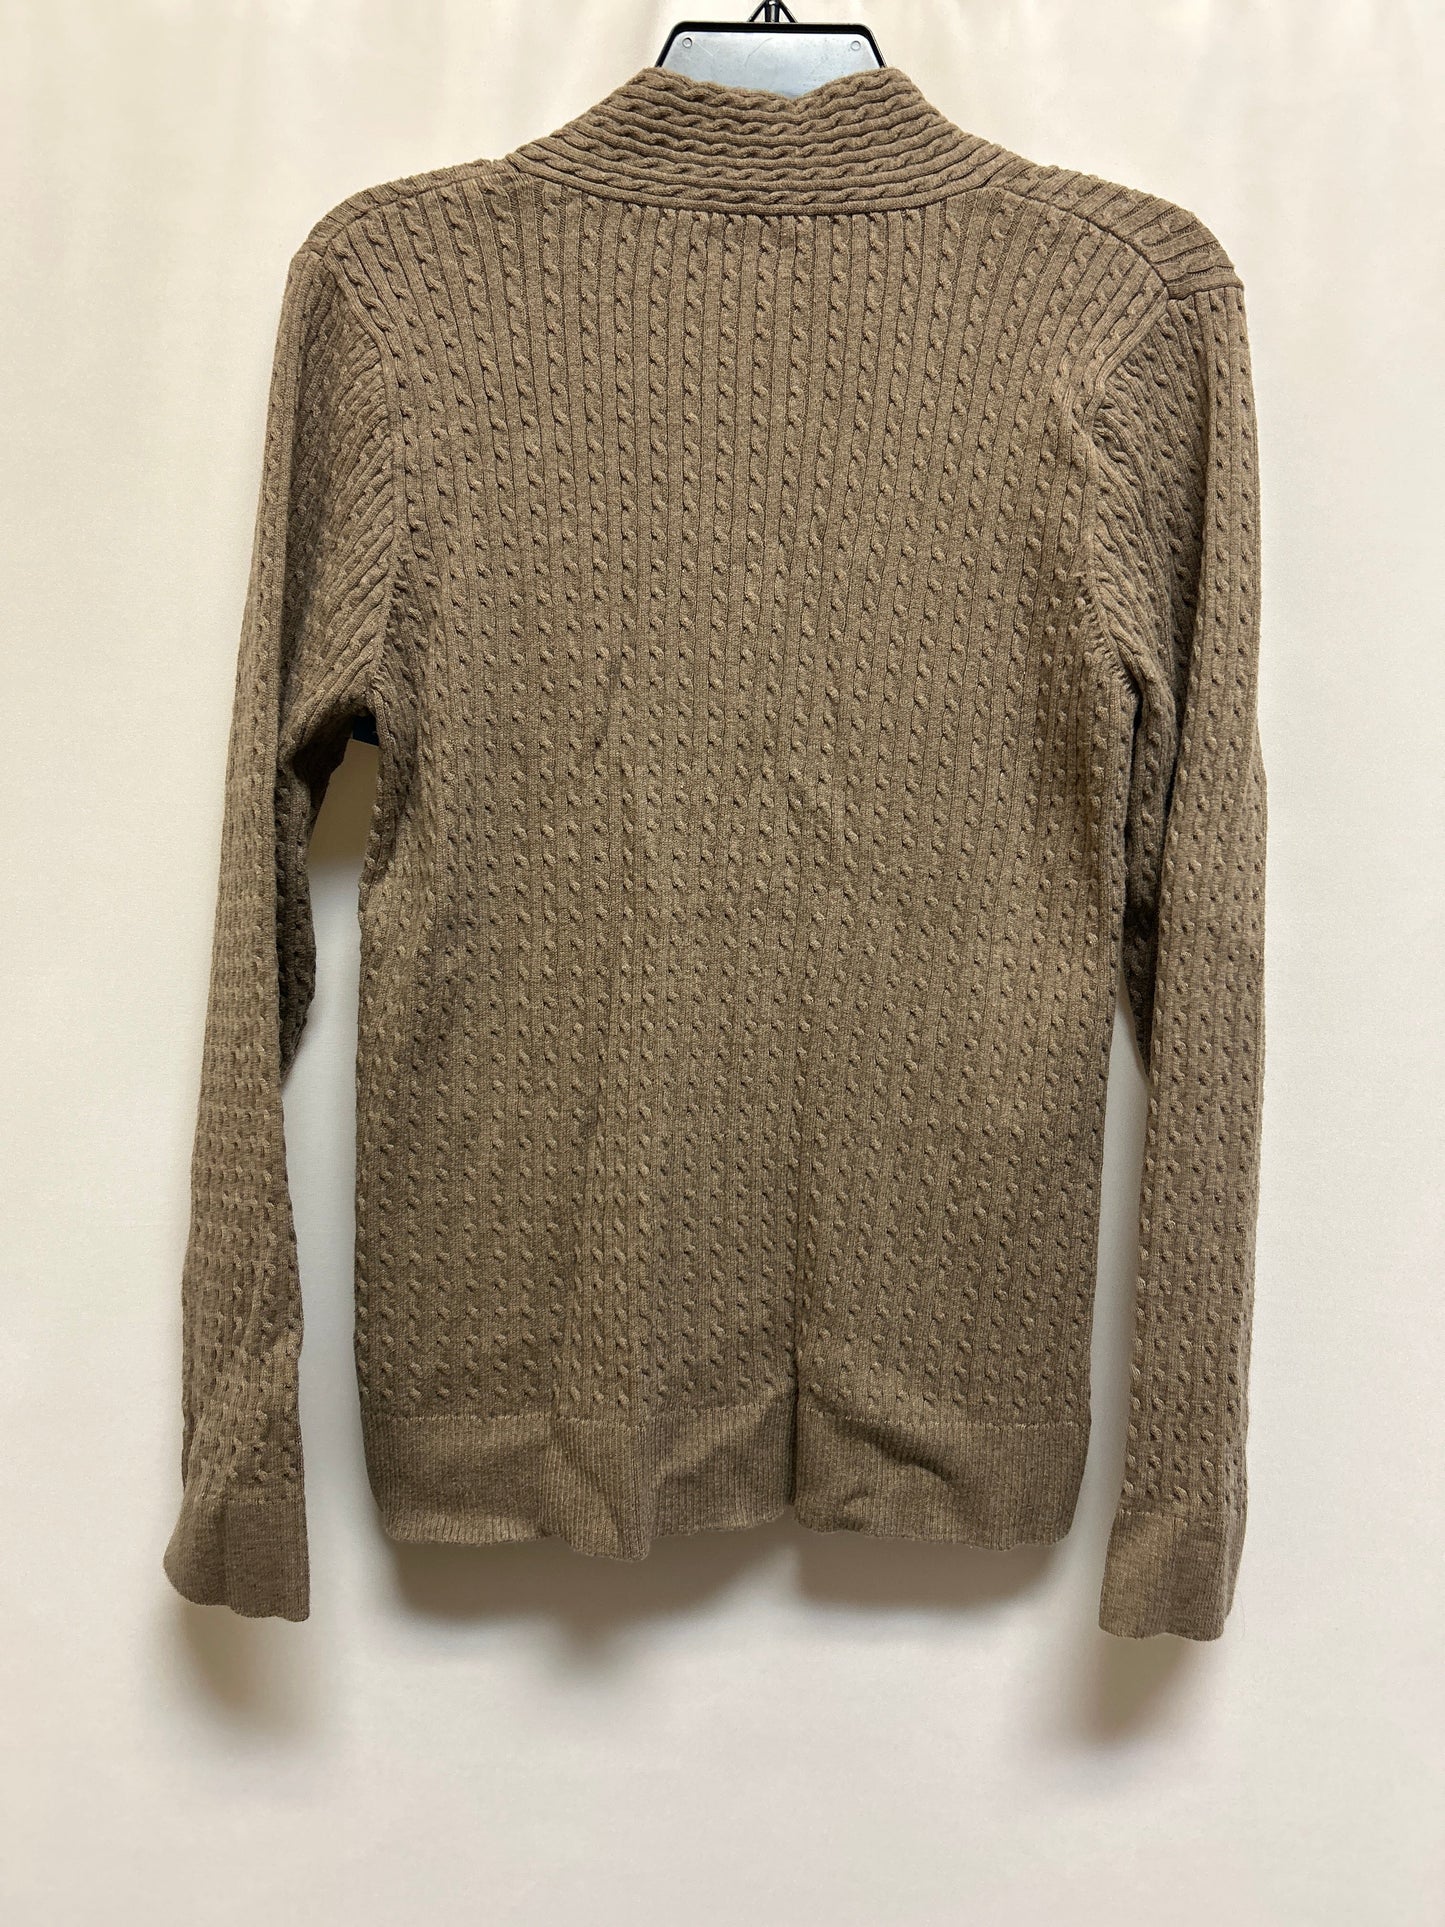 Top Long Sleeve By Croft And Barrow  Size: Xl